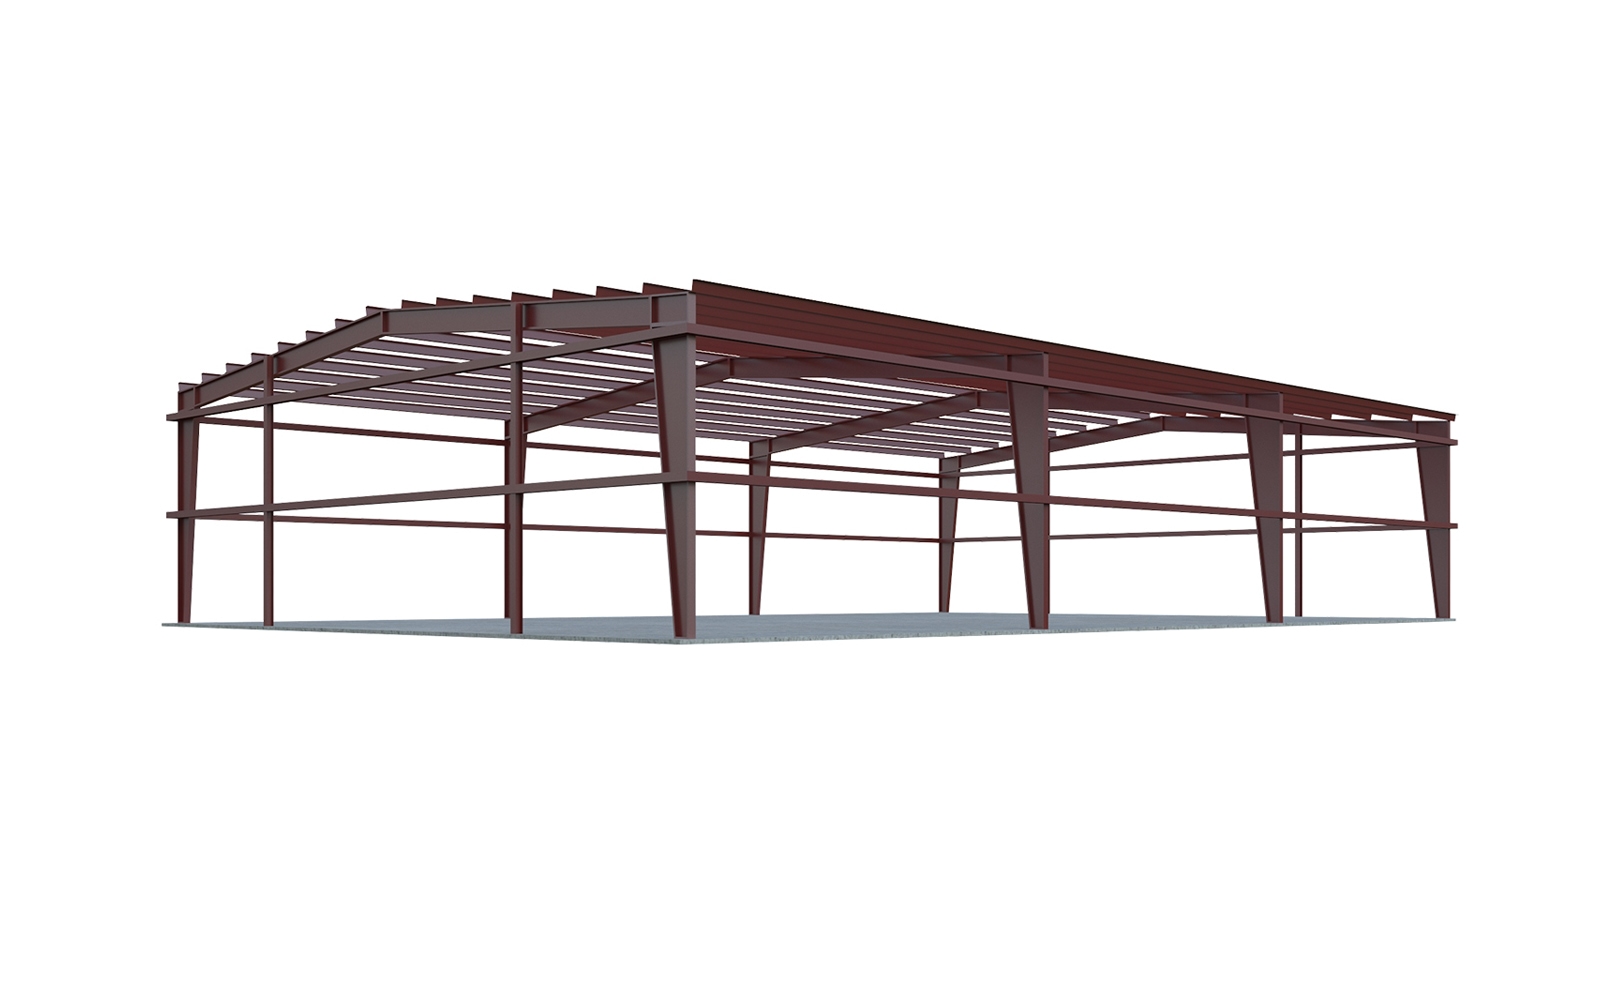 40x60 Metal Building Packages: Quick Prices | General Steel